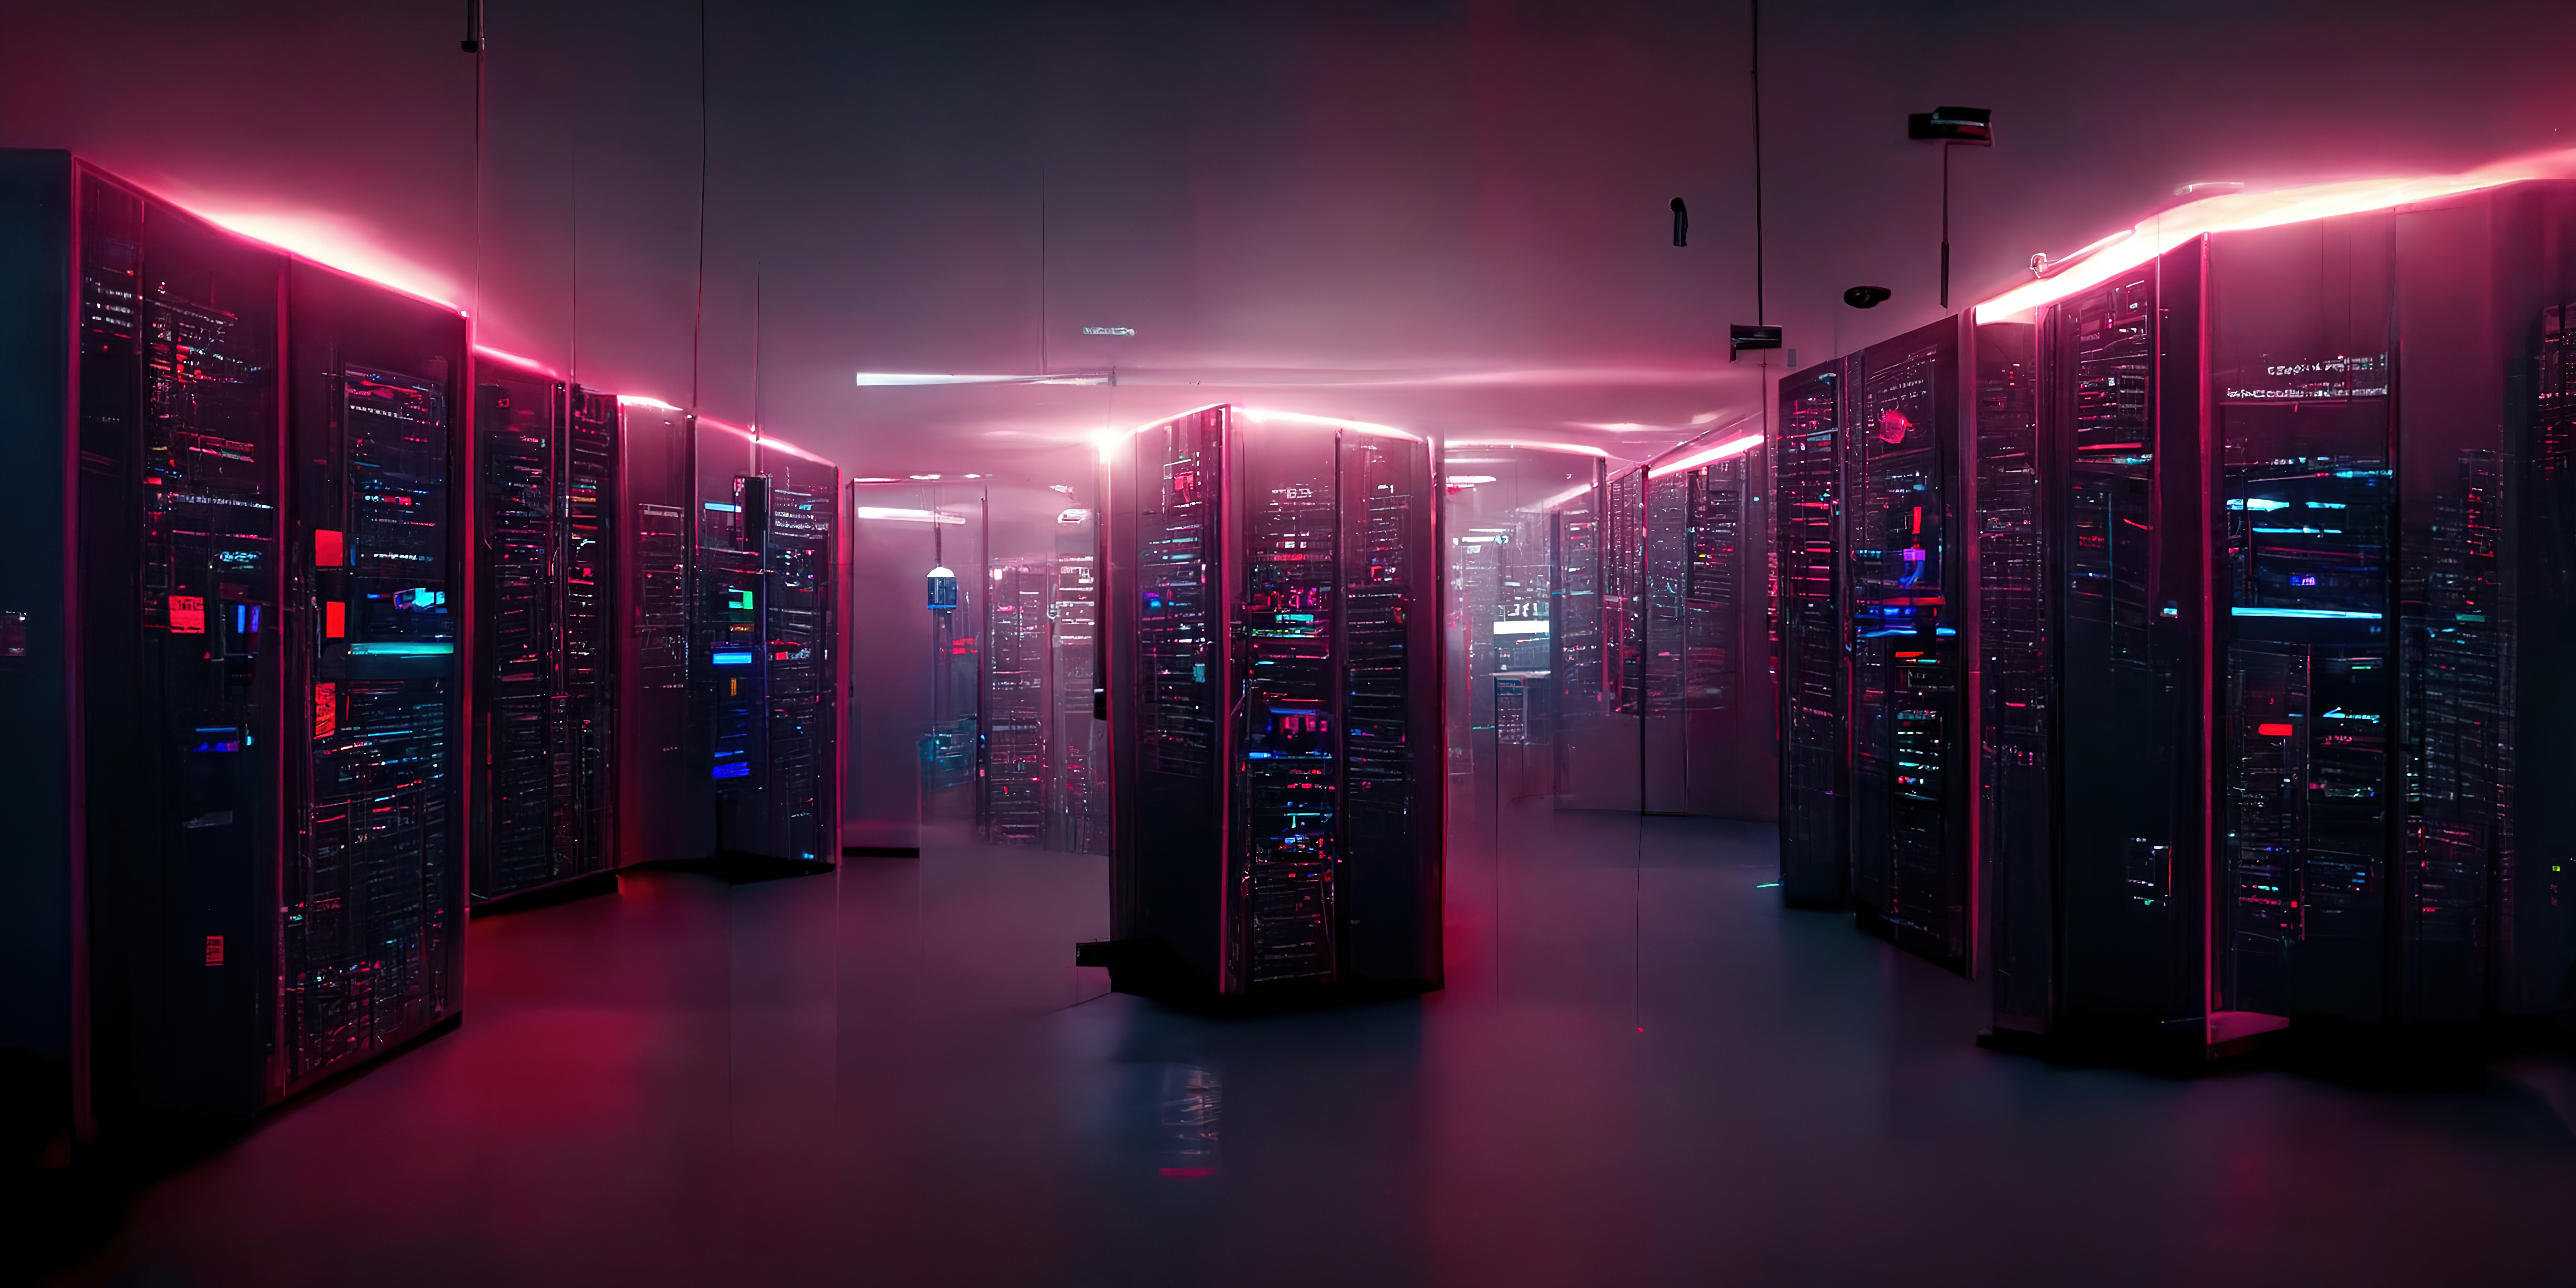 Plans for the supercomputer were announced by the Ministry of Economy, Trade and Industry in Japan.